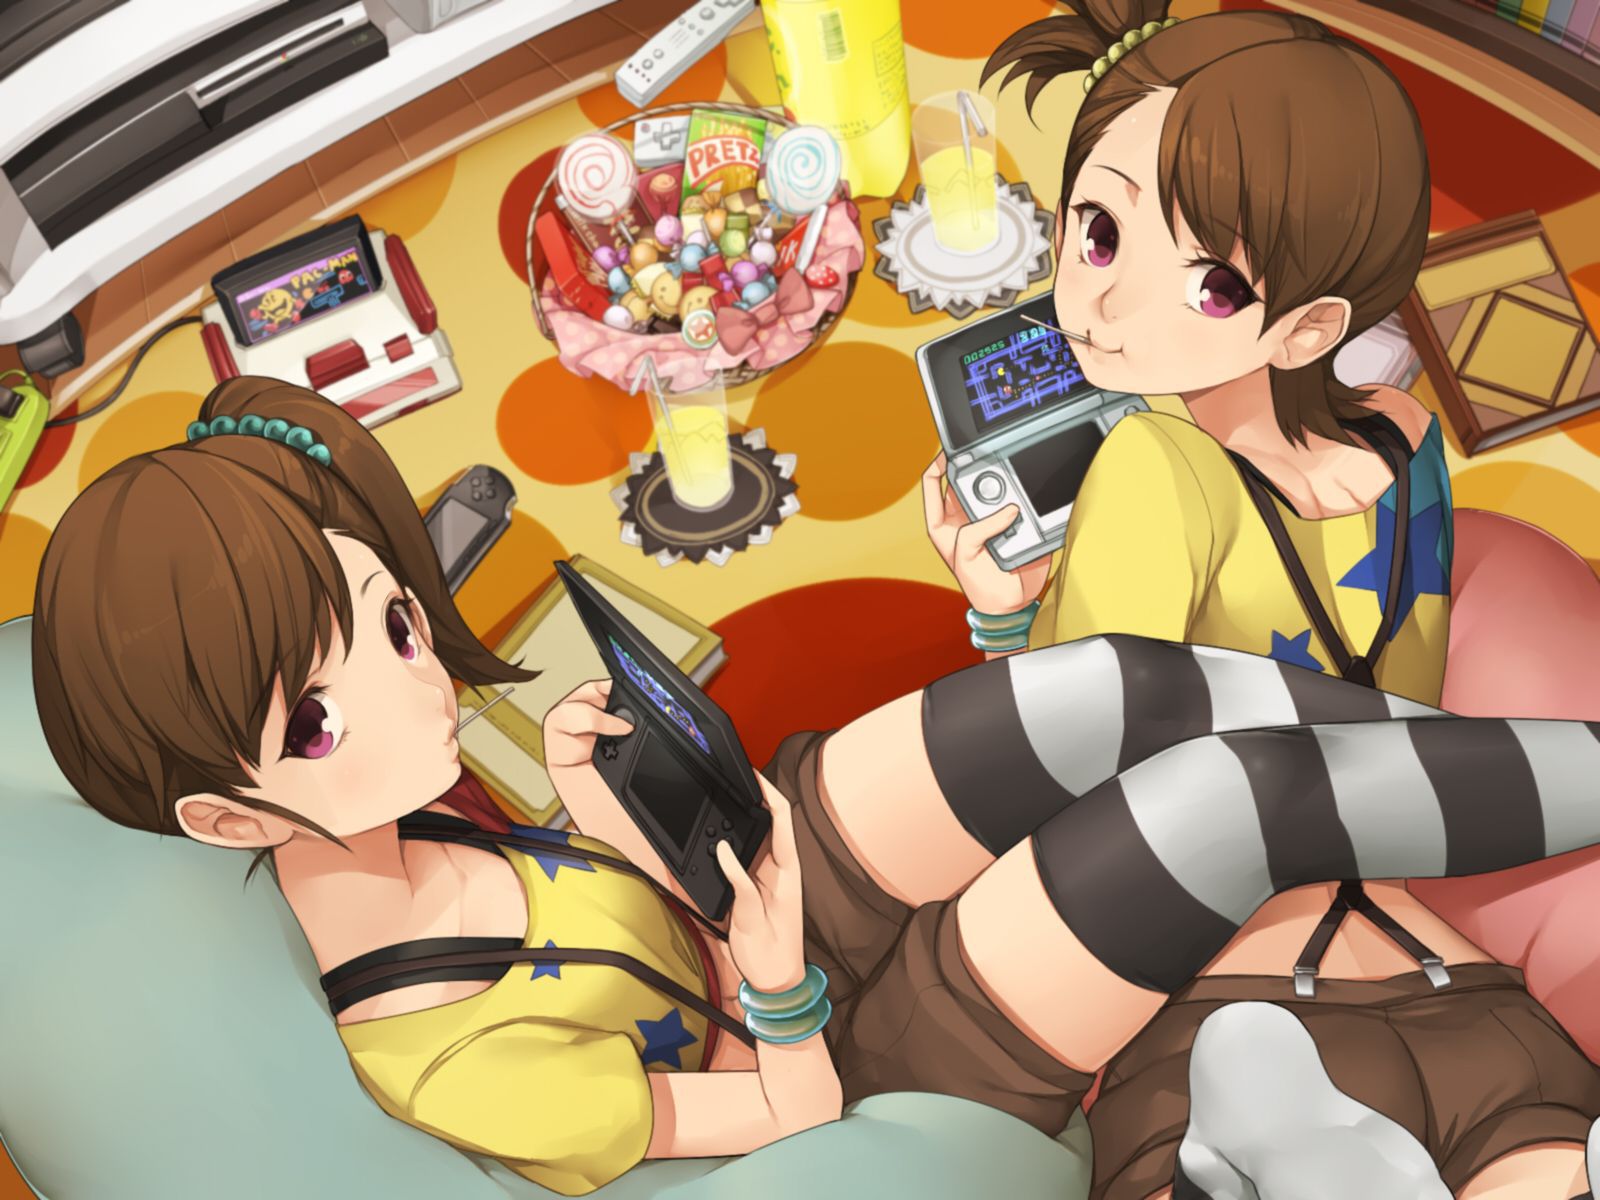 Cute girl games (second-ZIP) Rainbow images please 11